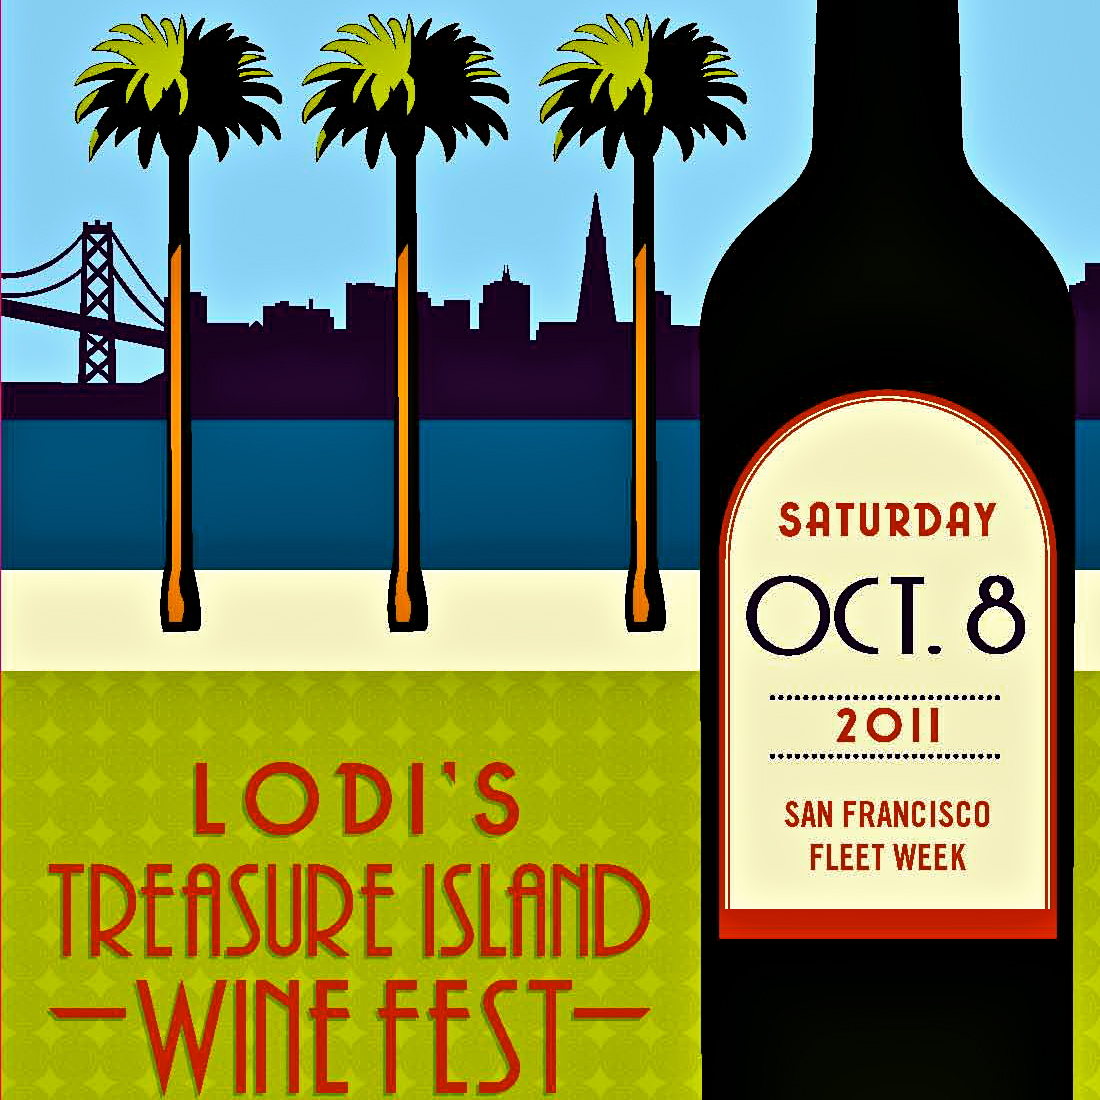 27 reasons to be at Treasure Island fest